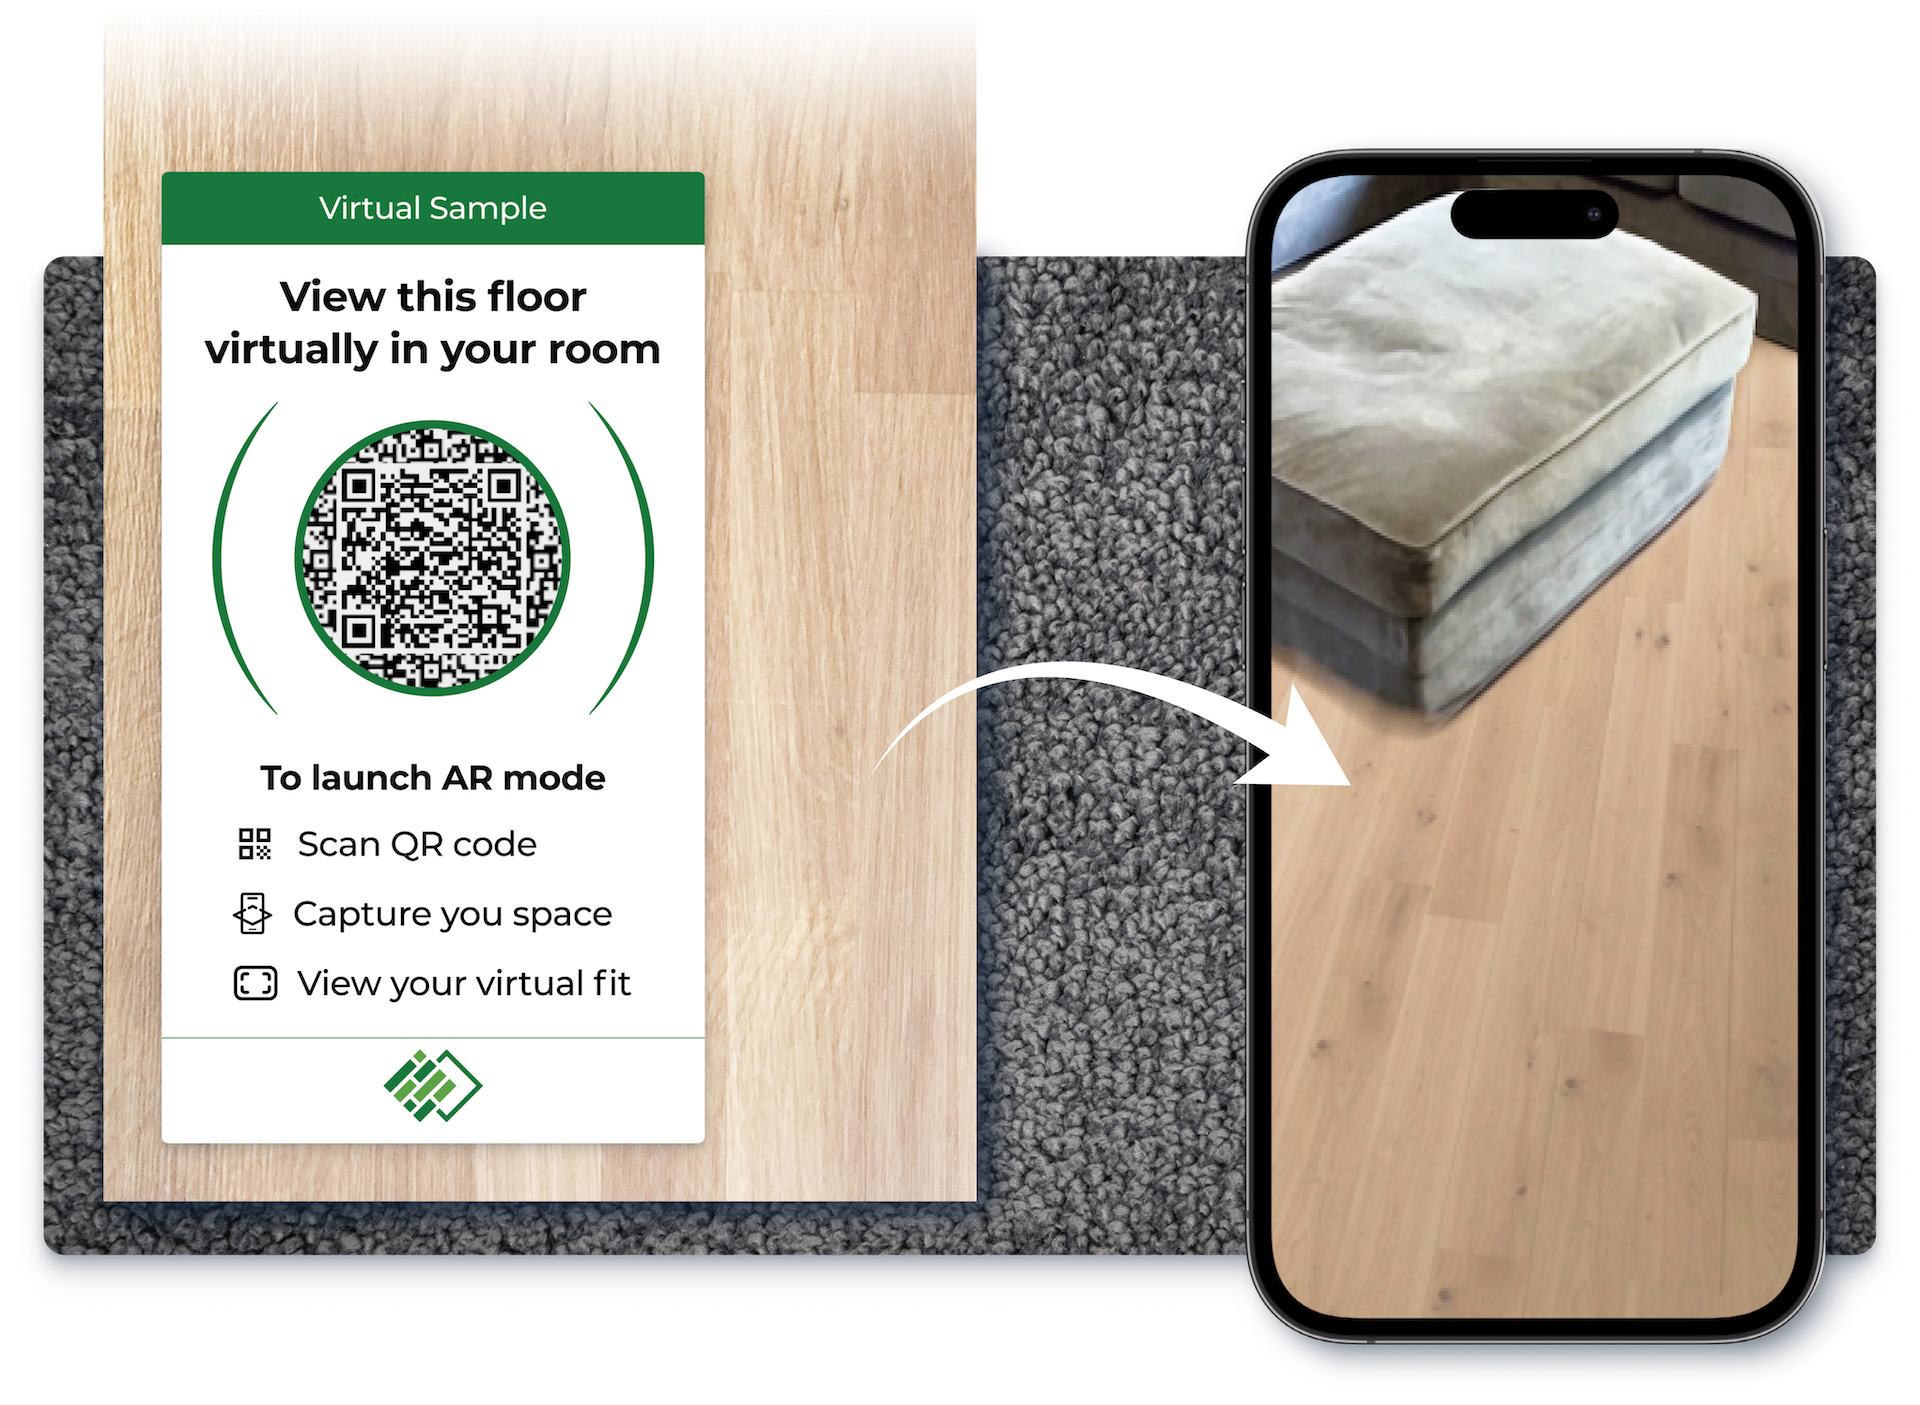 A QR code on a physical flooring sample that is scanned and viewed virtually on a smartphone.